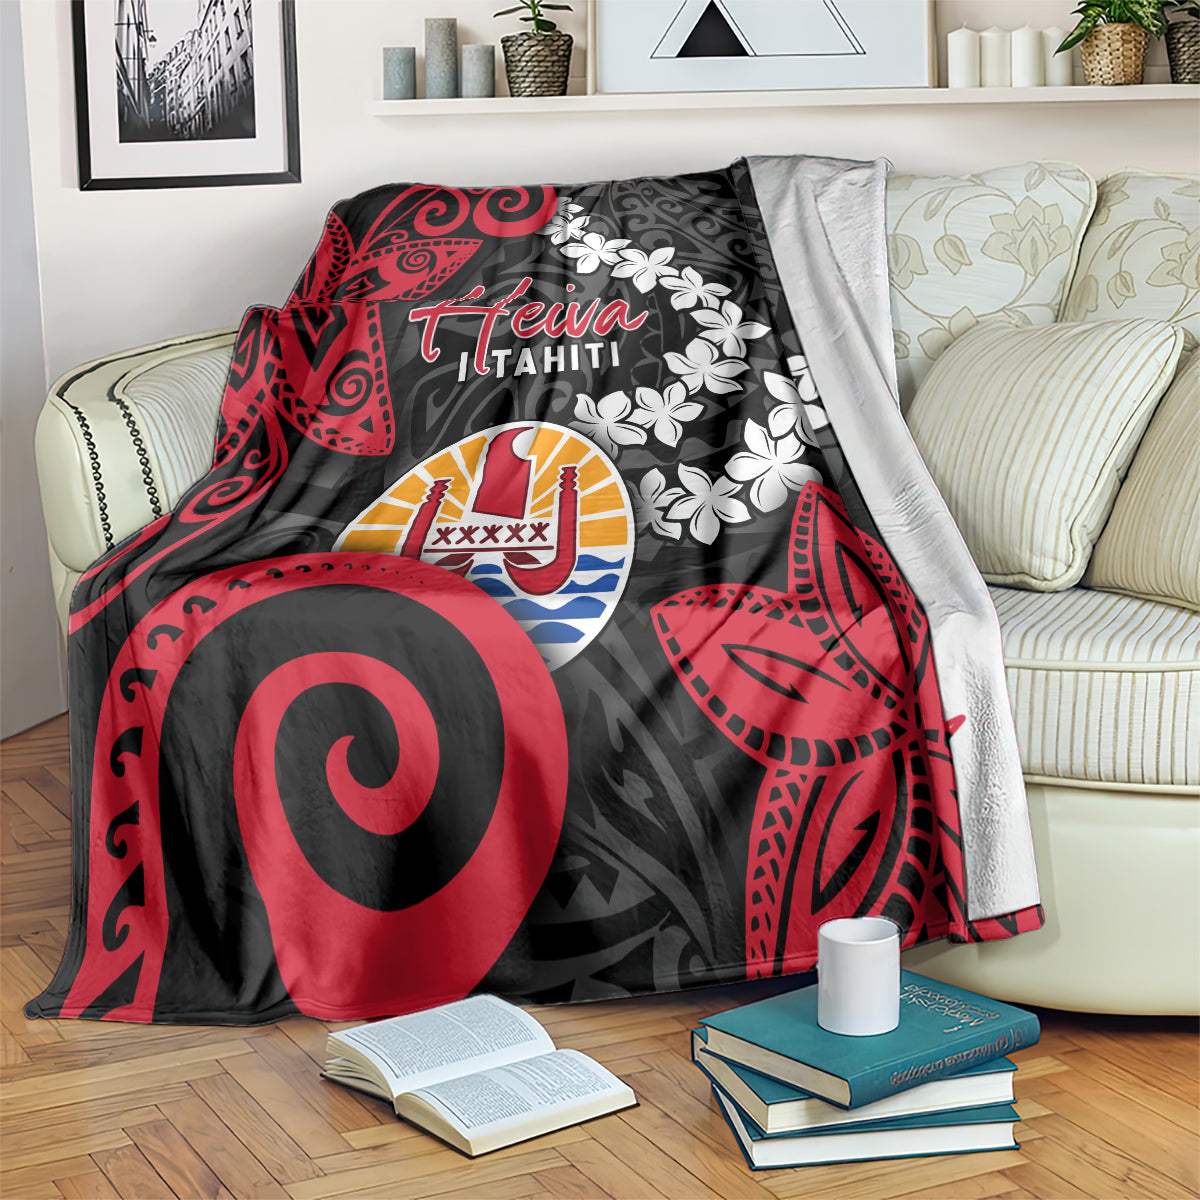 Tahiti Heiva Festival Blanket Floral Pattern With Coat Of Arms